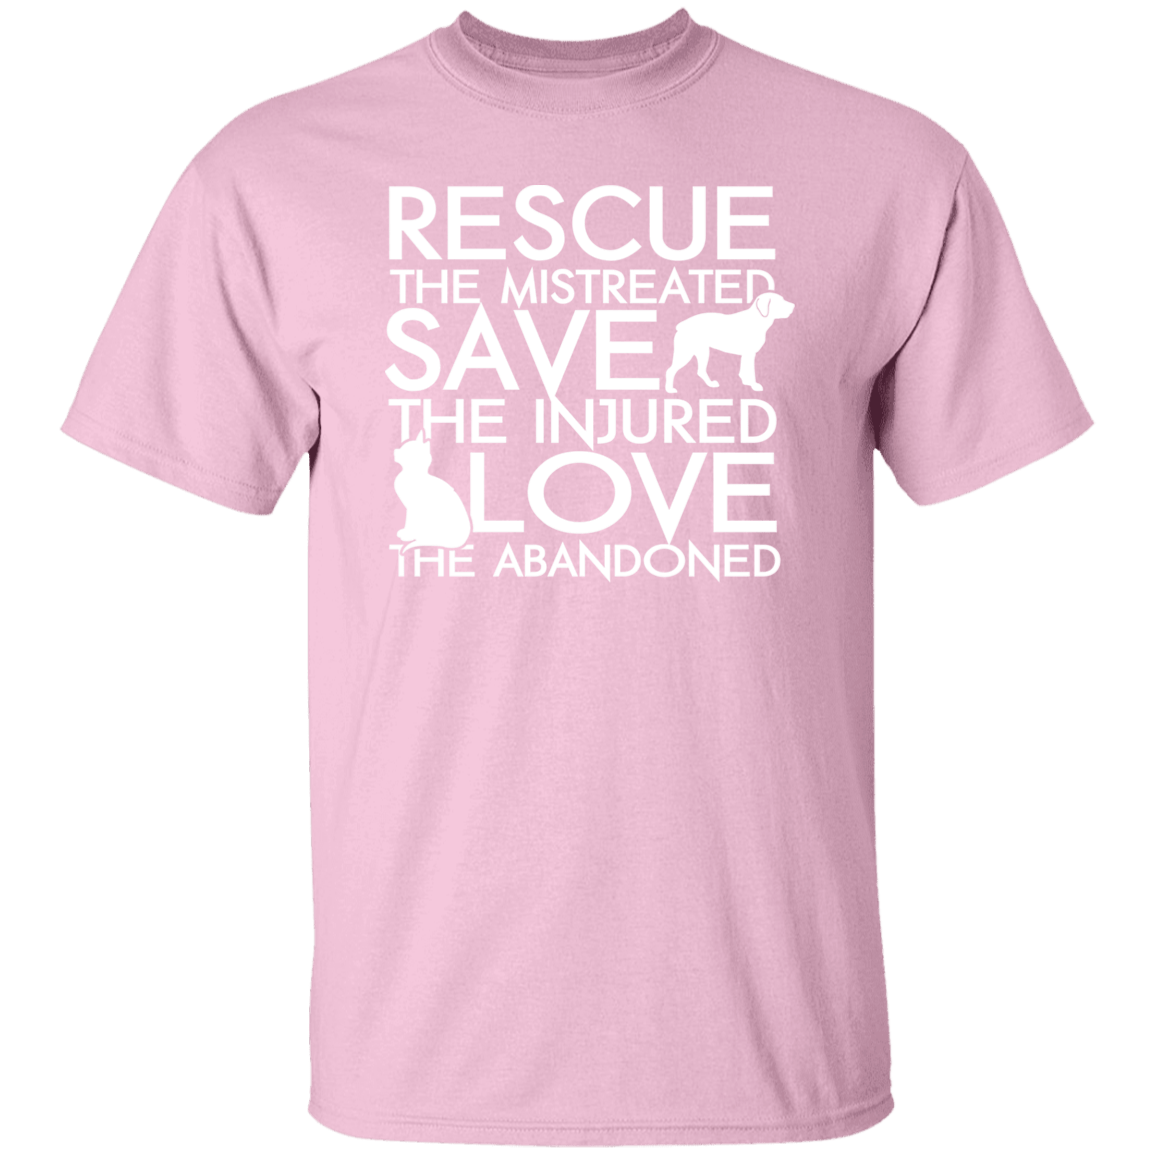 Rescue Save Love - T-Shirt.